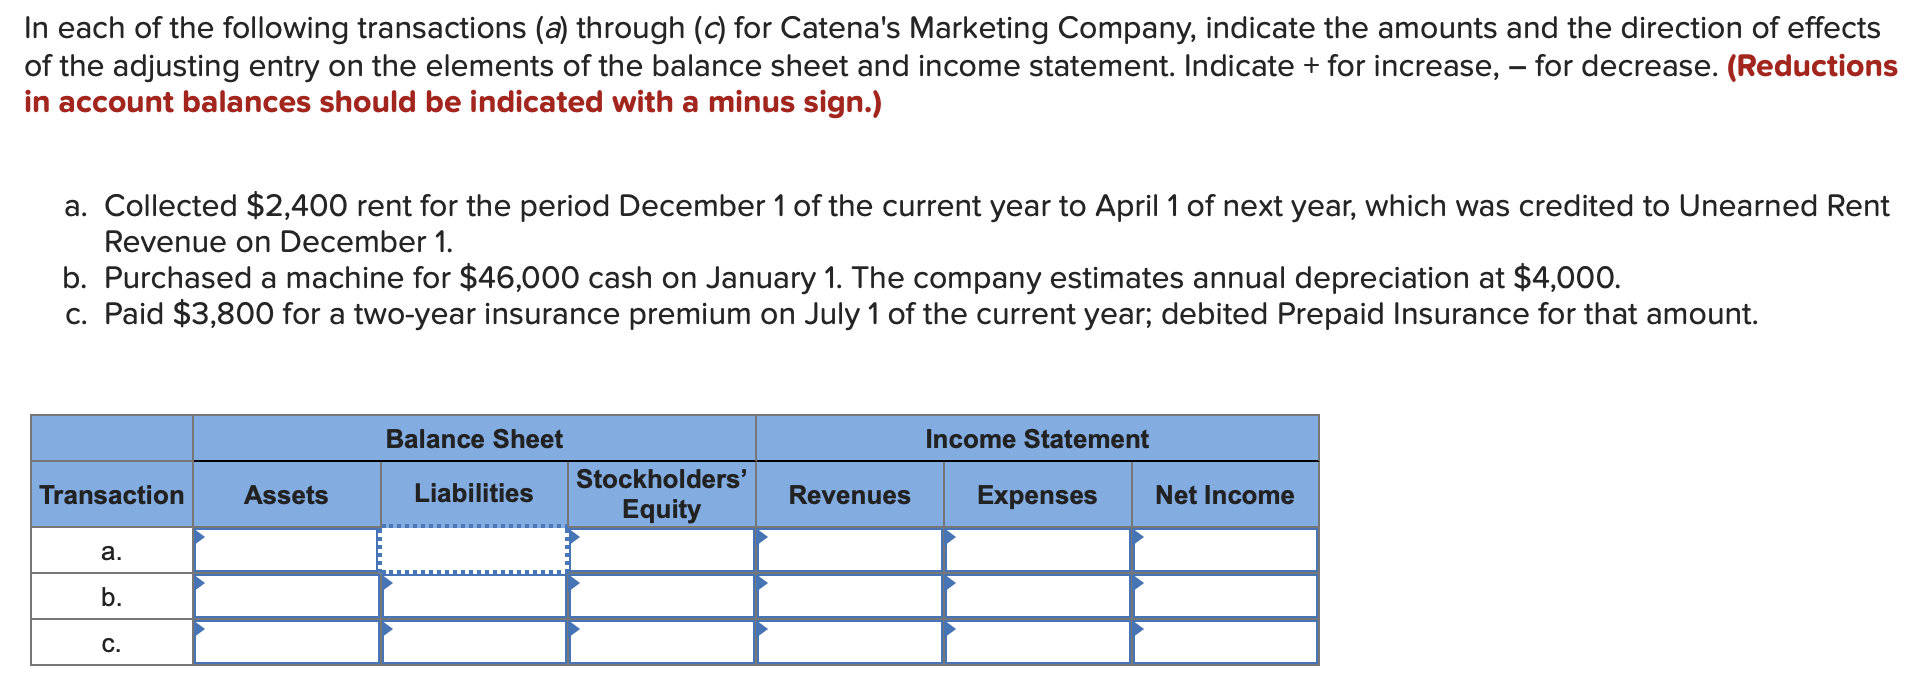 In each of the following transactions (a) through (c) for Catena's Marketing Company, indicate the amounts and the direction of effects
of the adjusting entry on the elements of the balance sheet and income statement. Indicate for increase, - for decrease. (Reductions
in account balances should be indicated with a minus sign.)
a. Collected $2,400 rent for the period December 1 of the current year to April 1 of next year, which was credited to Unearned Rent
Revenue on December 1
b. Purchased a machine for $46,000 cash on January 1. The company estimates annual depreciation at $4,000.
c. Paid $3,800 for a two-year insurance premium on July 1 of the current year; debited Prepaid Insurance for that amount.
Balance Sheet
Income Statement
Stockholders'
Liabilities
Assets
Transaction
Revenues
Expenses
Net Income
Equity
а.
b.
с.
